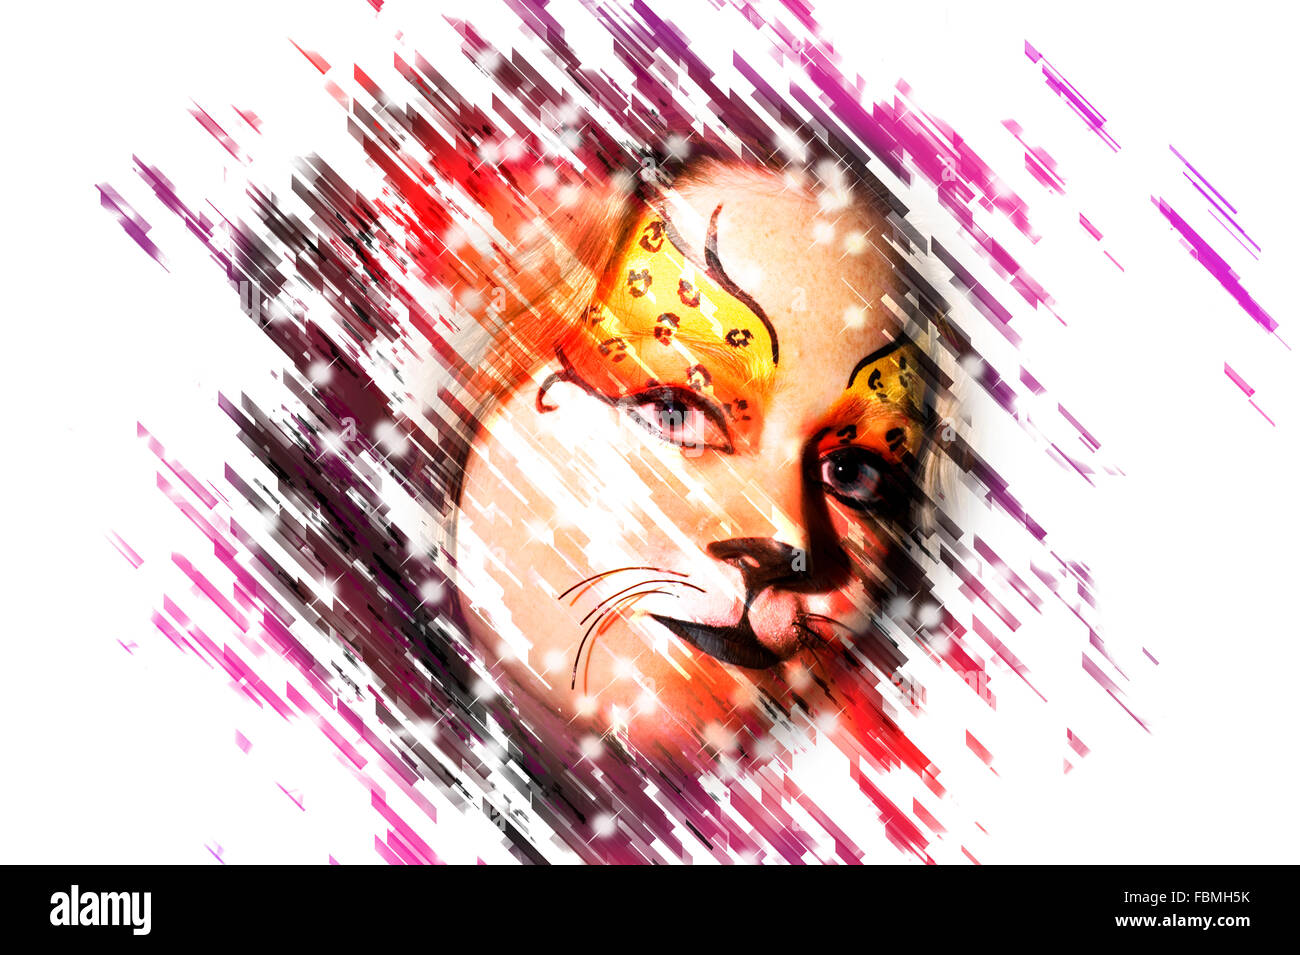 Digitally manipulated young teenage female model with elaborate tiger make up mask Stock Photo